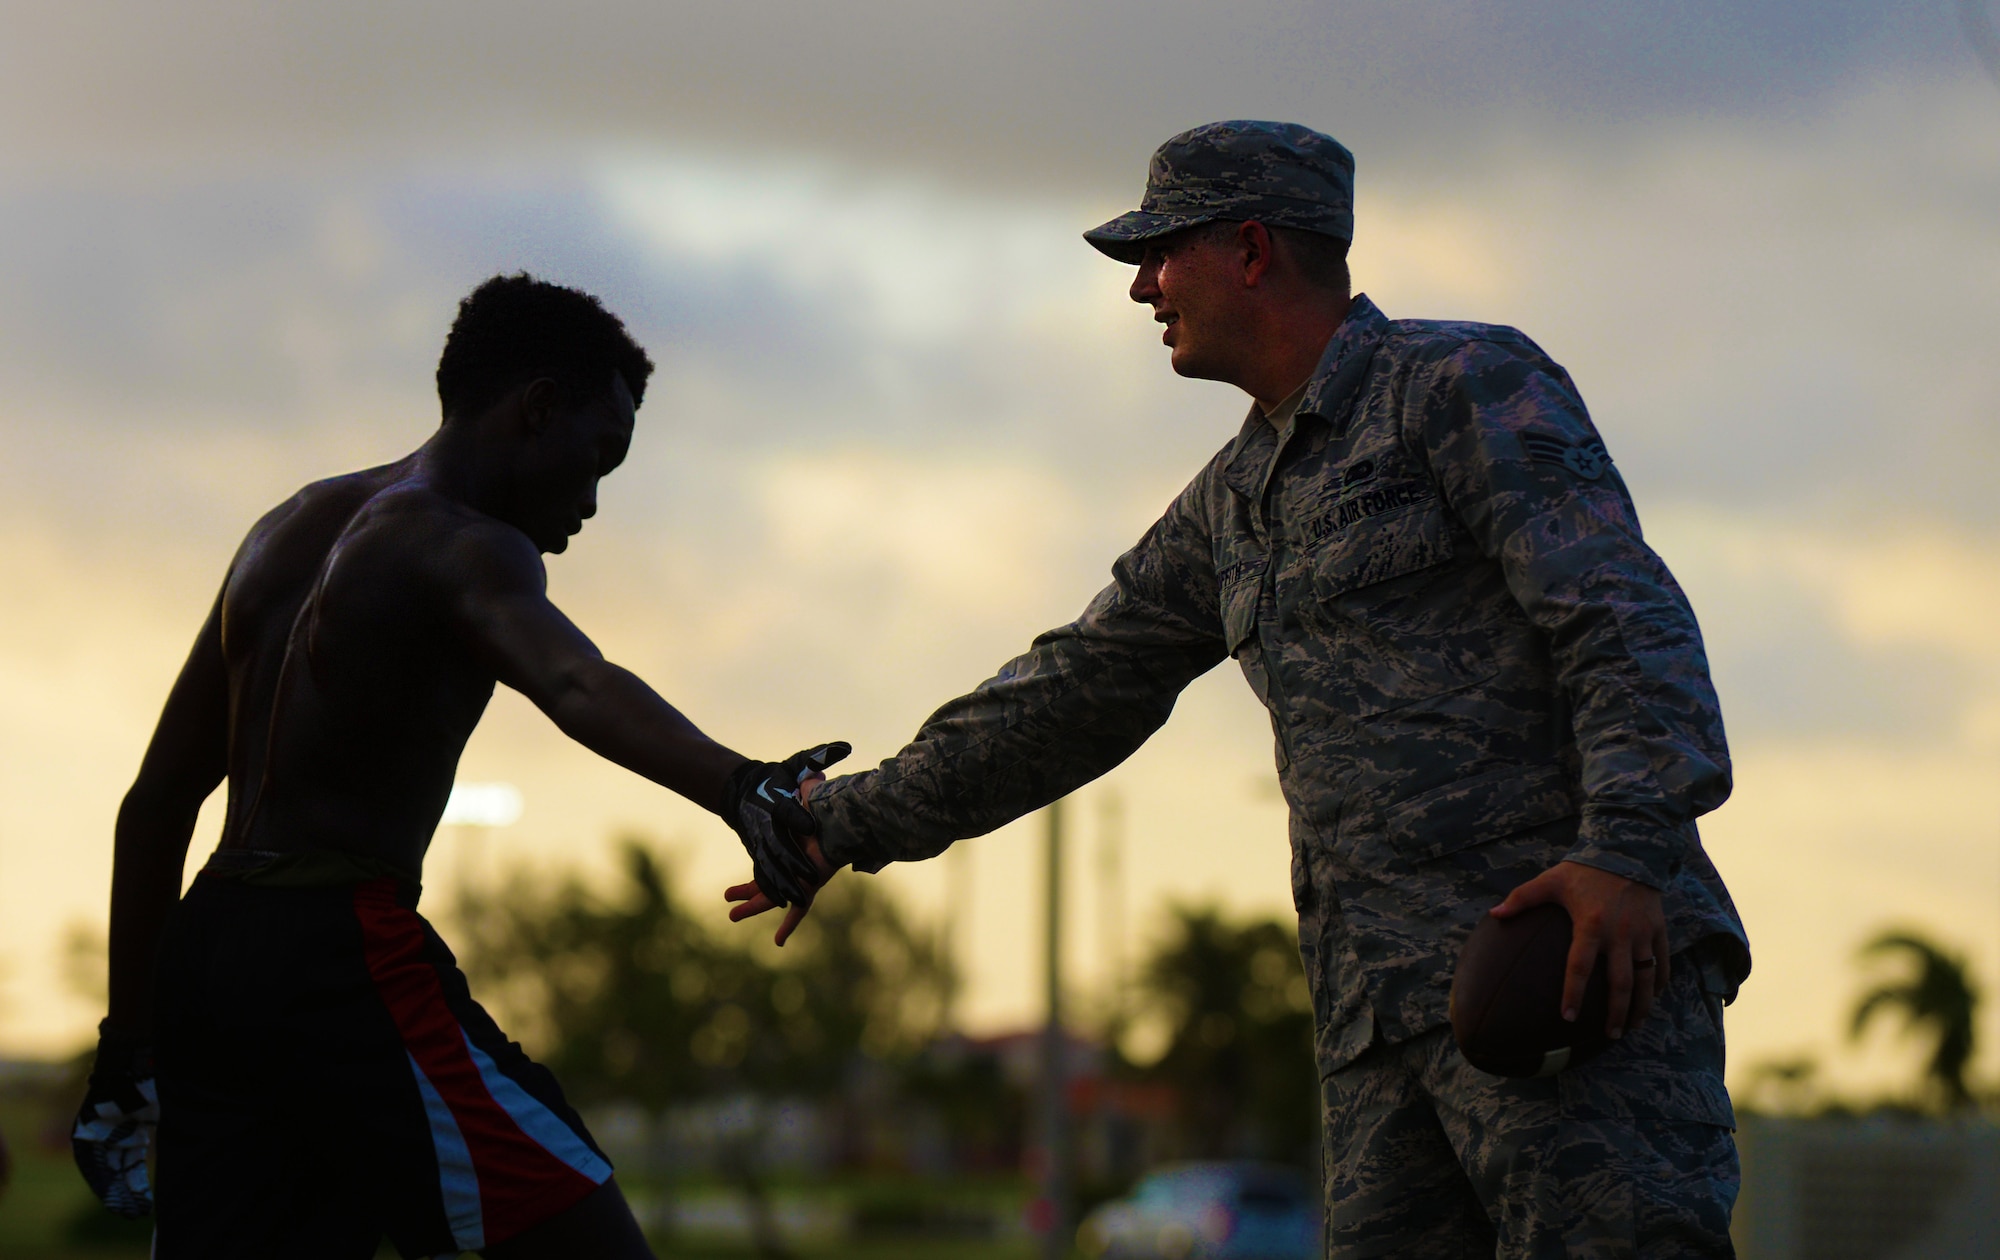 Senior Airman Presley Griffith, 36th Mobility Response Squadron executive assistant, right, compliments a high school athlete on a practice drill June 6, 2015, at Andersen Air Force Base, Guam. Griffith is a volunteer football coach and offers a free football spring practice camp three times per week as volunteer coach as a pre-season training opportunity to Andersen AFB student athletes. (U.S. Air Force photo by Senior Airman Alexander W. Riedel/Released)